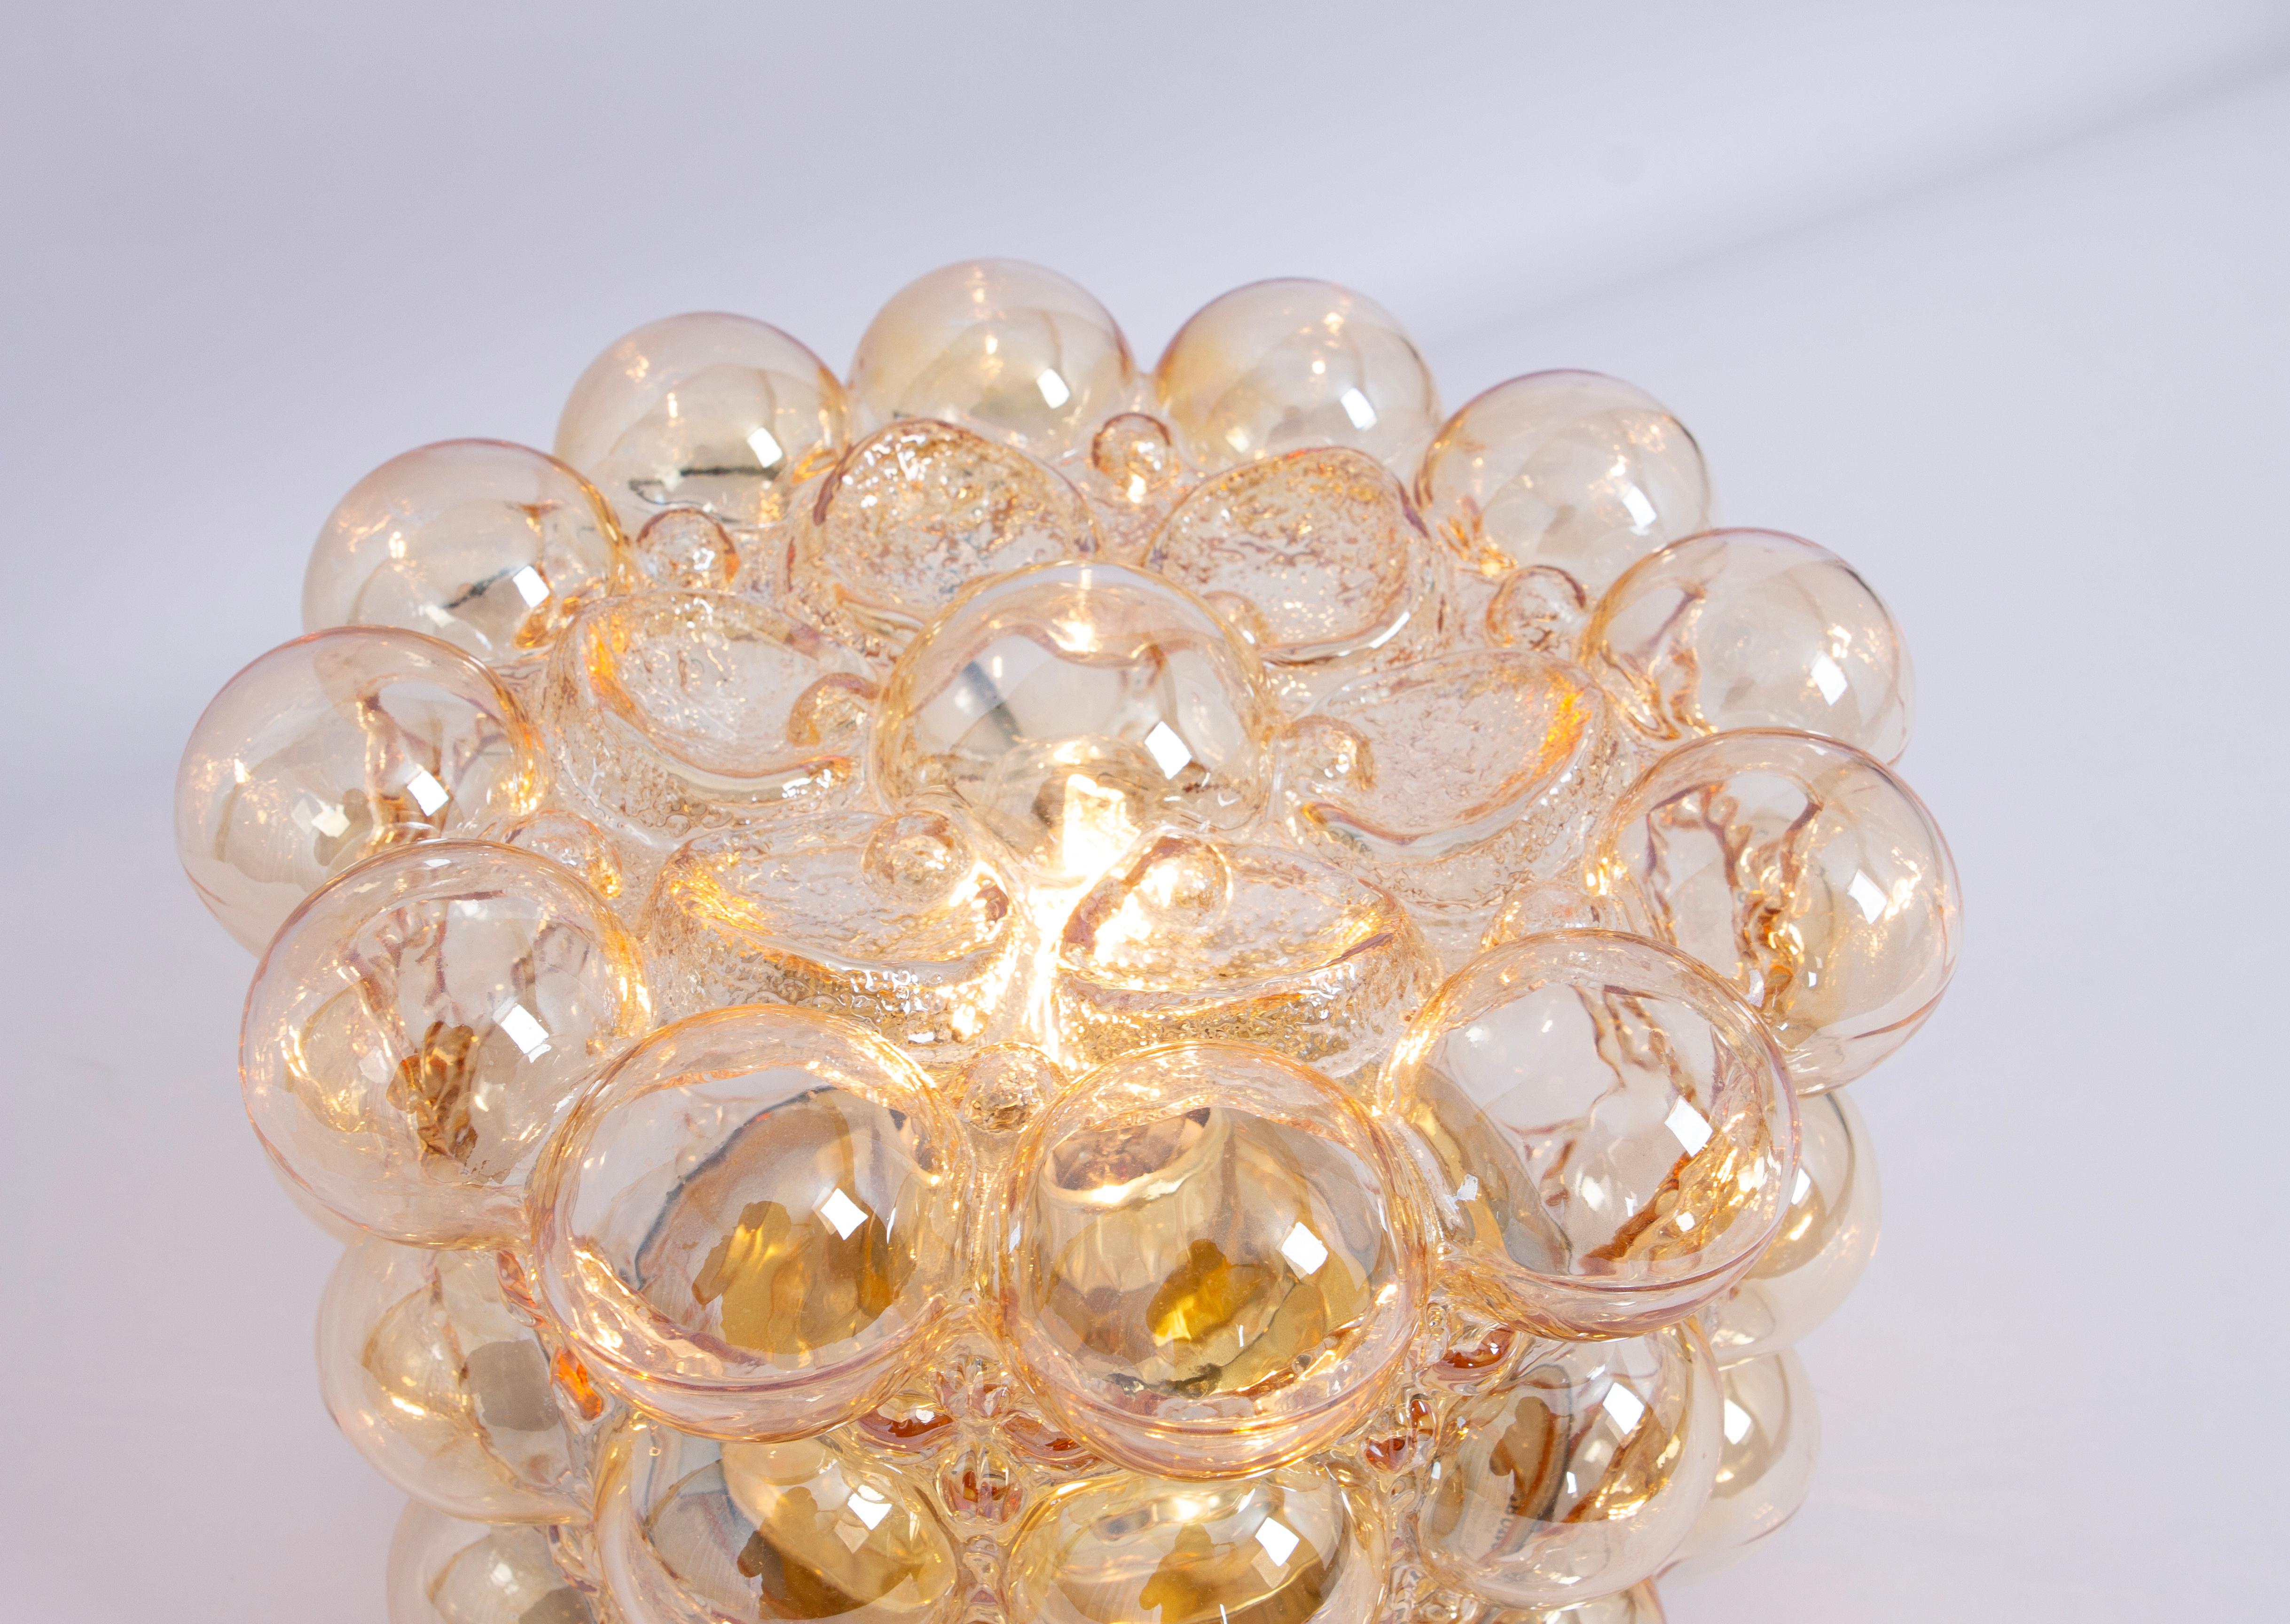 1 of 3 Amber bubble glass Flushmount light by Helena Tynell, Limburg, Germany.
High quality and in very good condition. Cleaned, well-wired, and ready to use. 

The Limburg Bubble Glass Flush Mount provides a warm and inviting illumination that